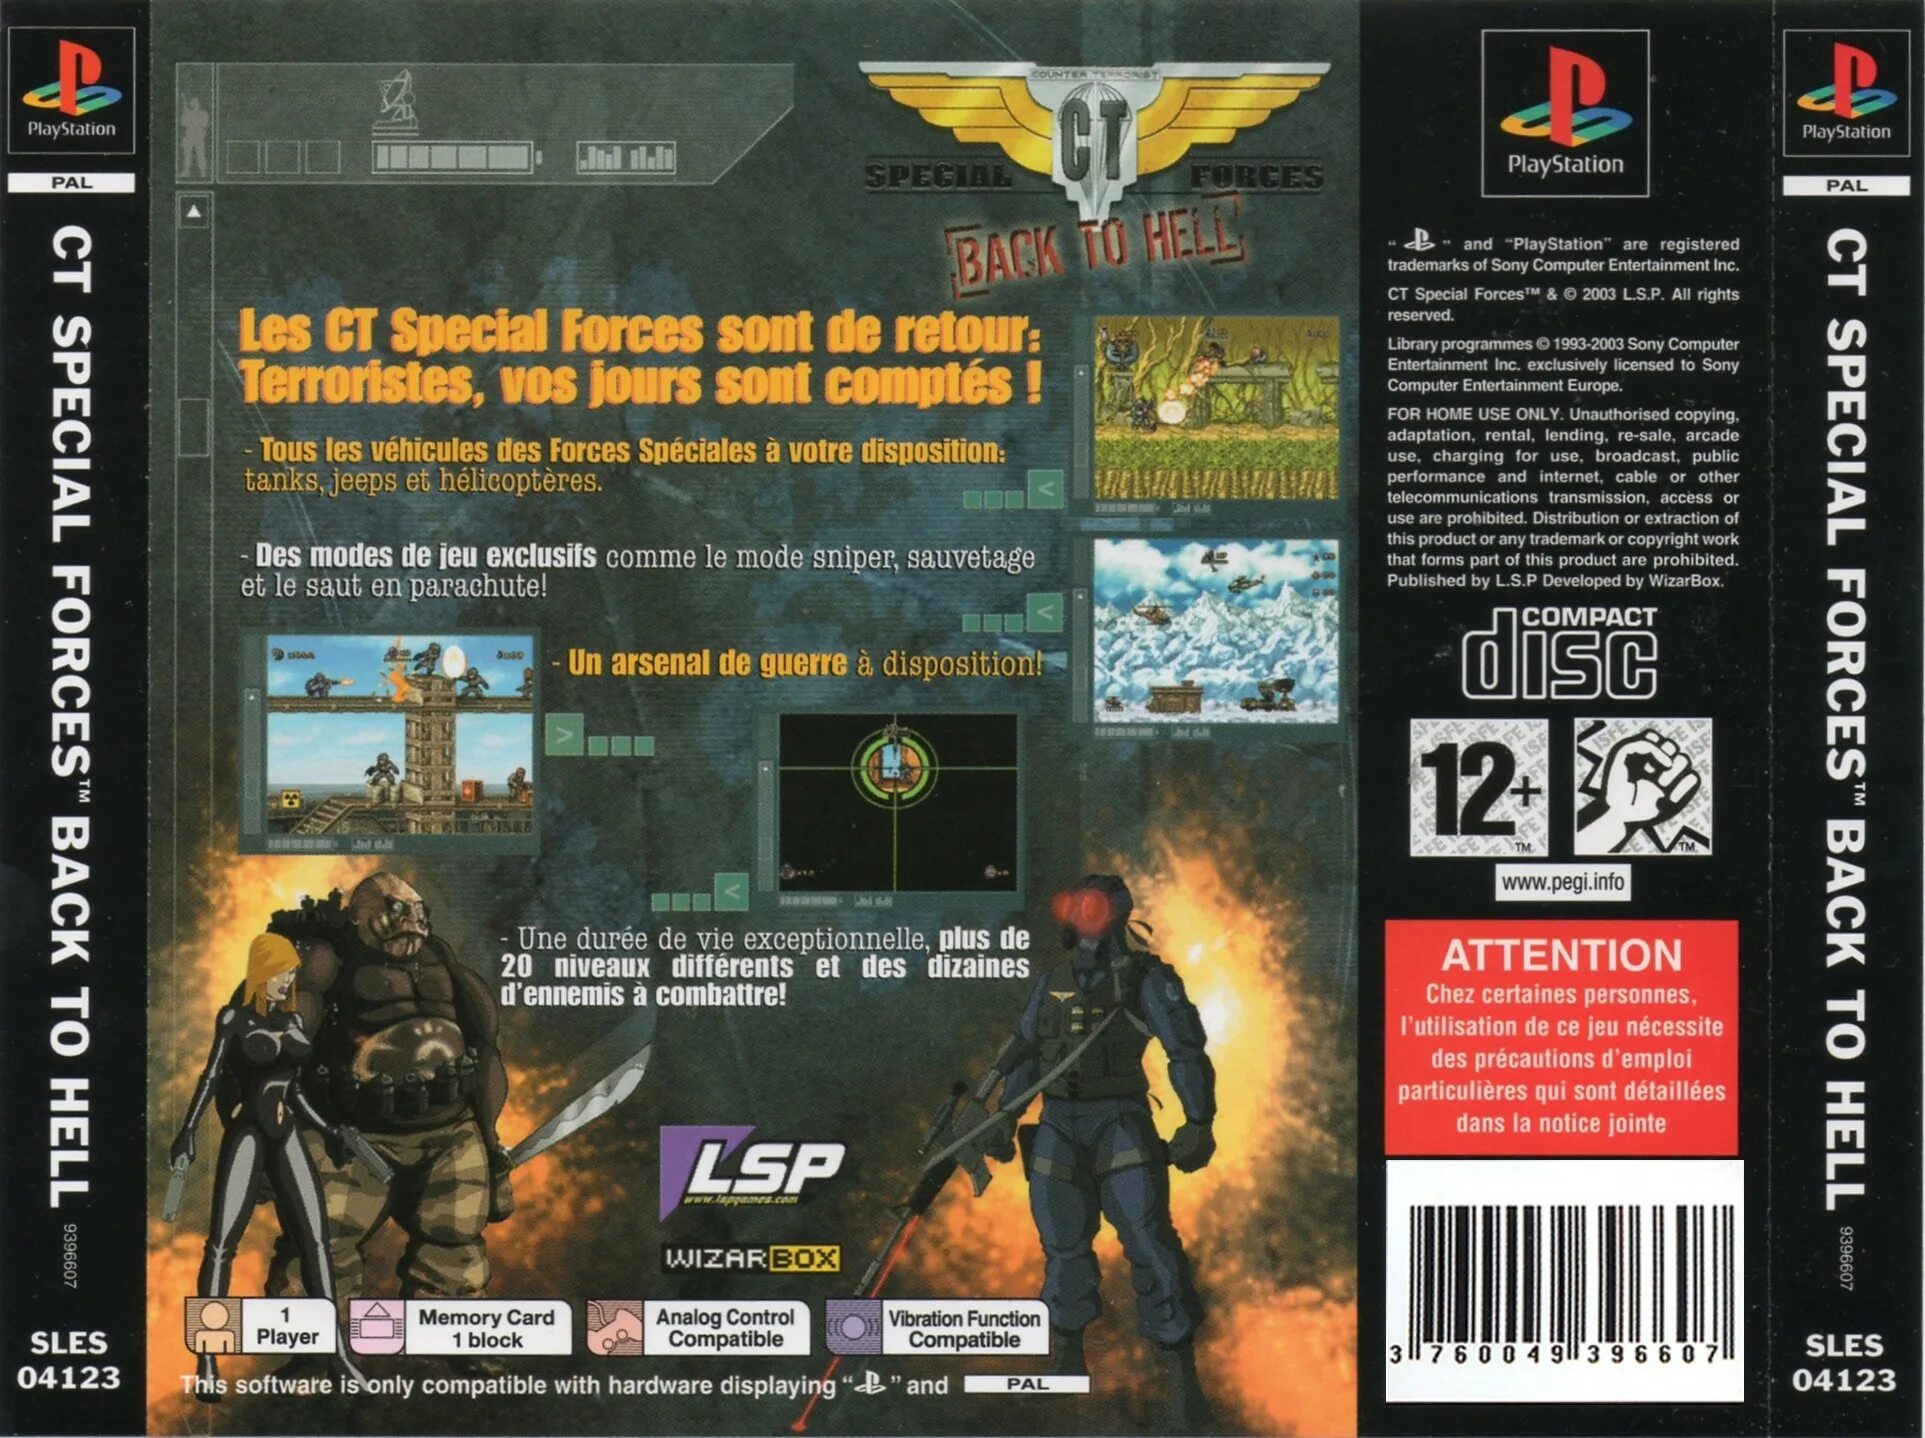 CT Special Forces ps1 обложка. CT Special Forces 1 ps1. CT Special Forces 2 - back to Hell ps1. CT Special Forces ps1 Cover. Back special